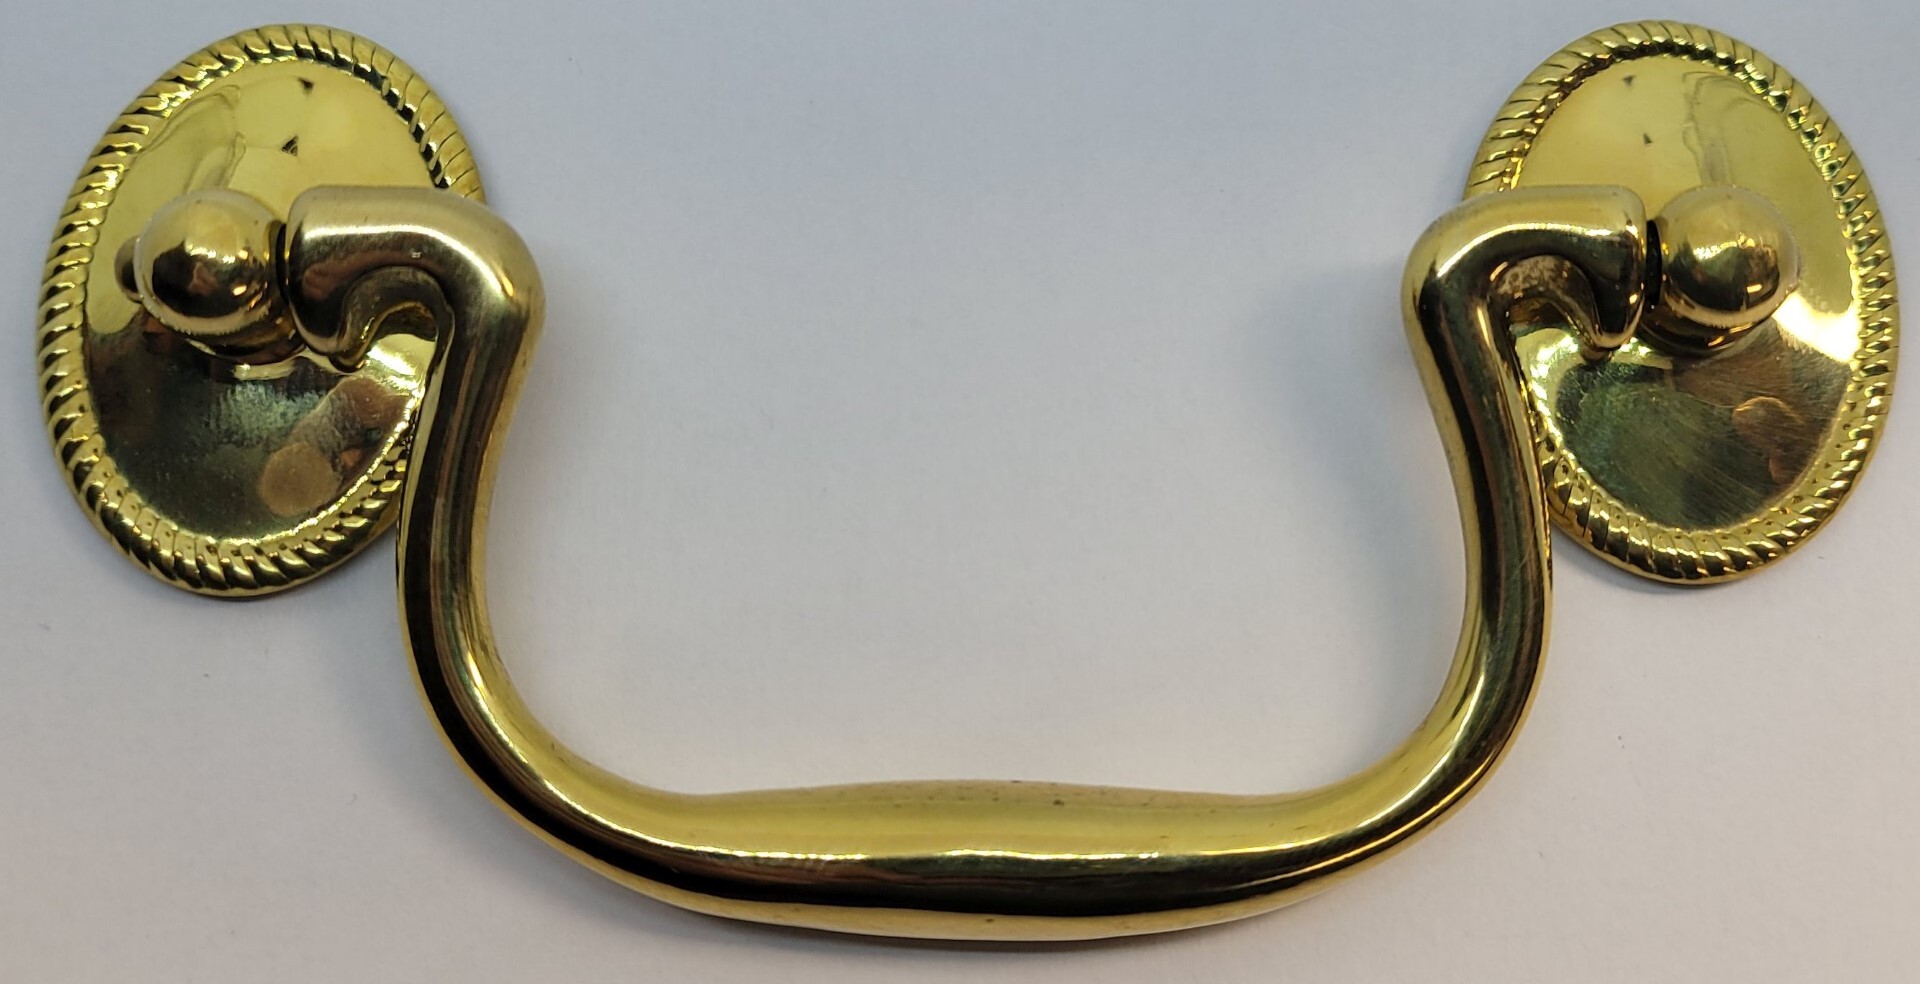 Swan-Neck Brass Bail Pull with Ringed Round Rosettes - 3-Inch